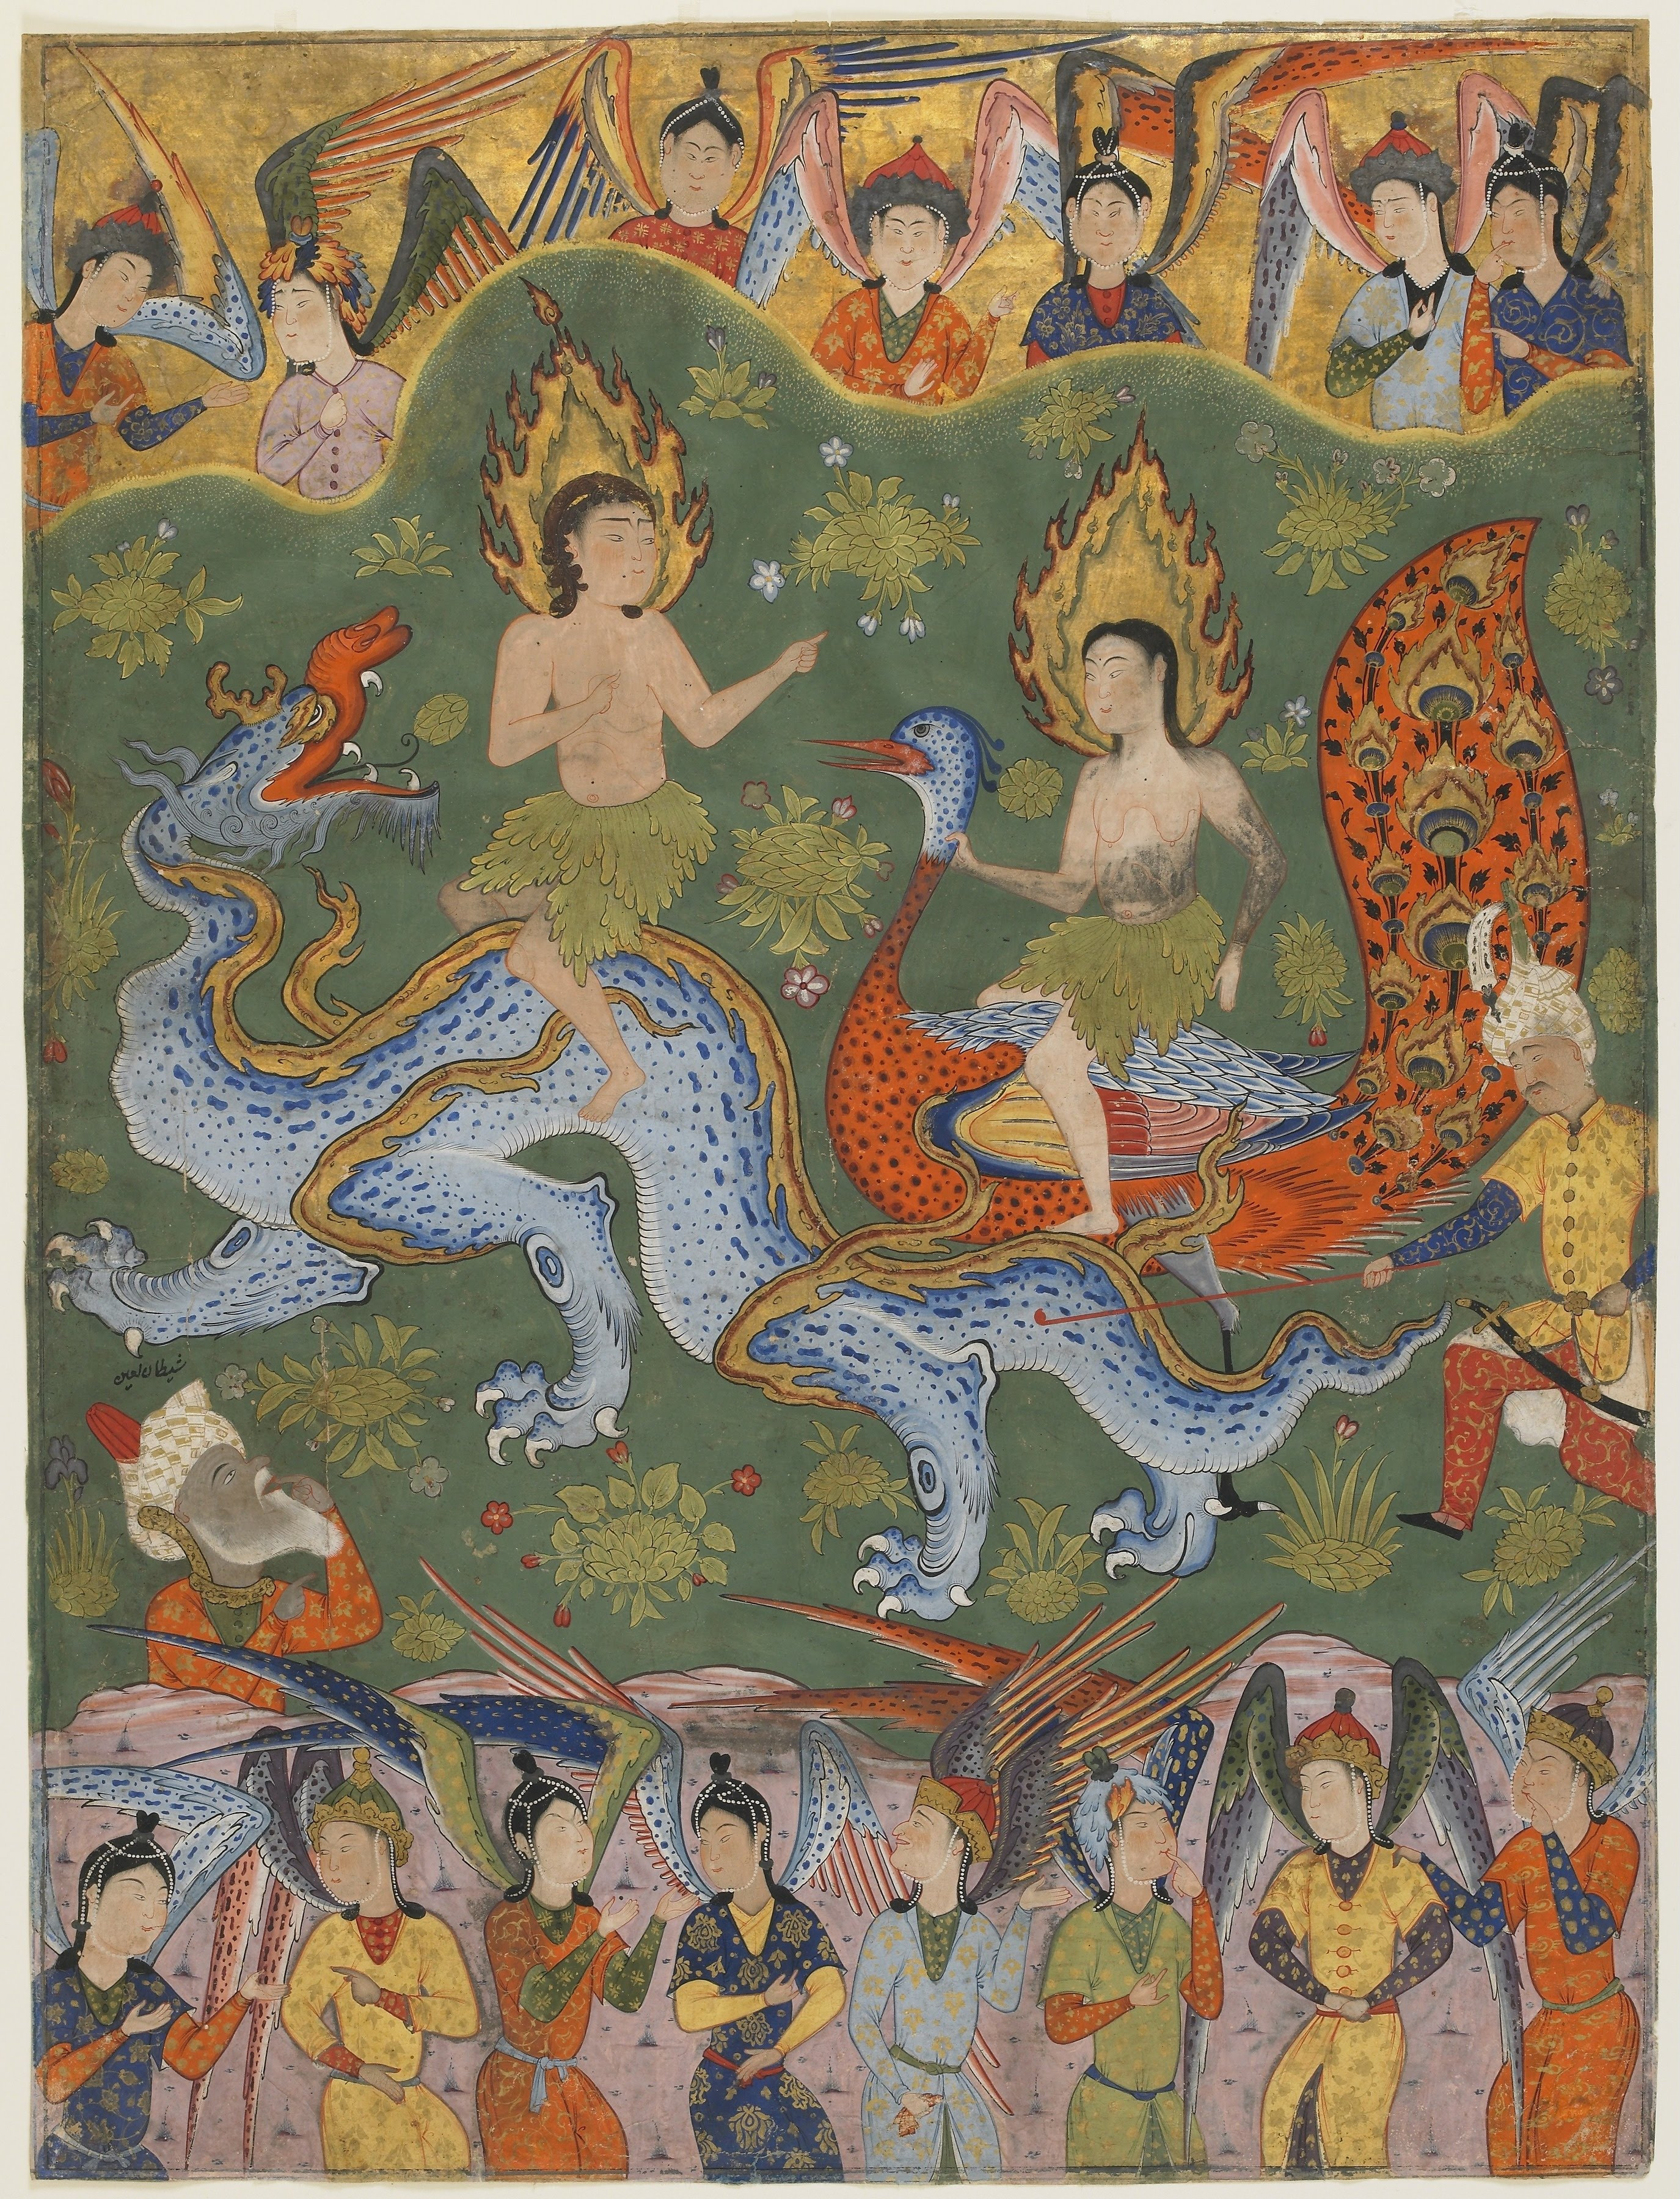 Adam (riding a dragon) and Eve (riding a phoenix) in the Garden of Eden, being watched by the angels. Iran, 1500s.jpg